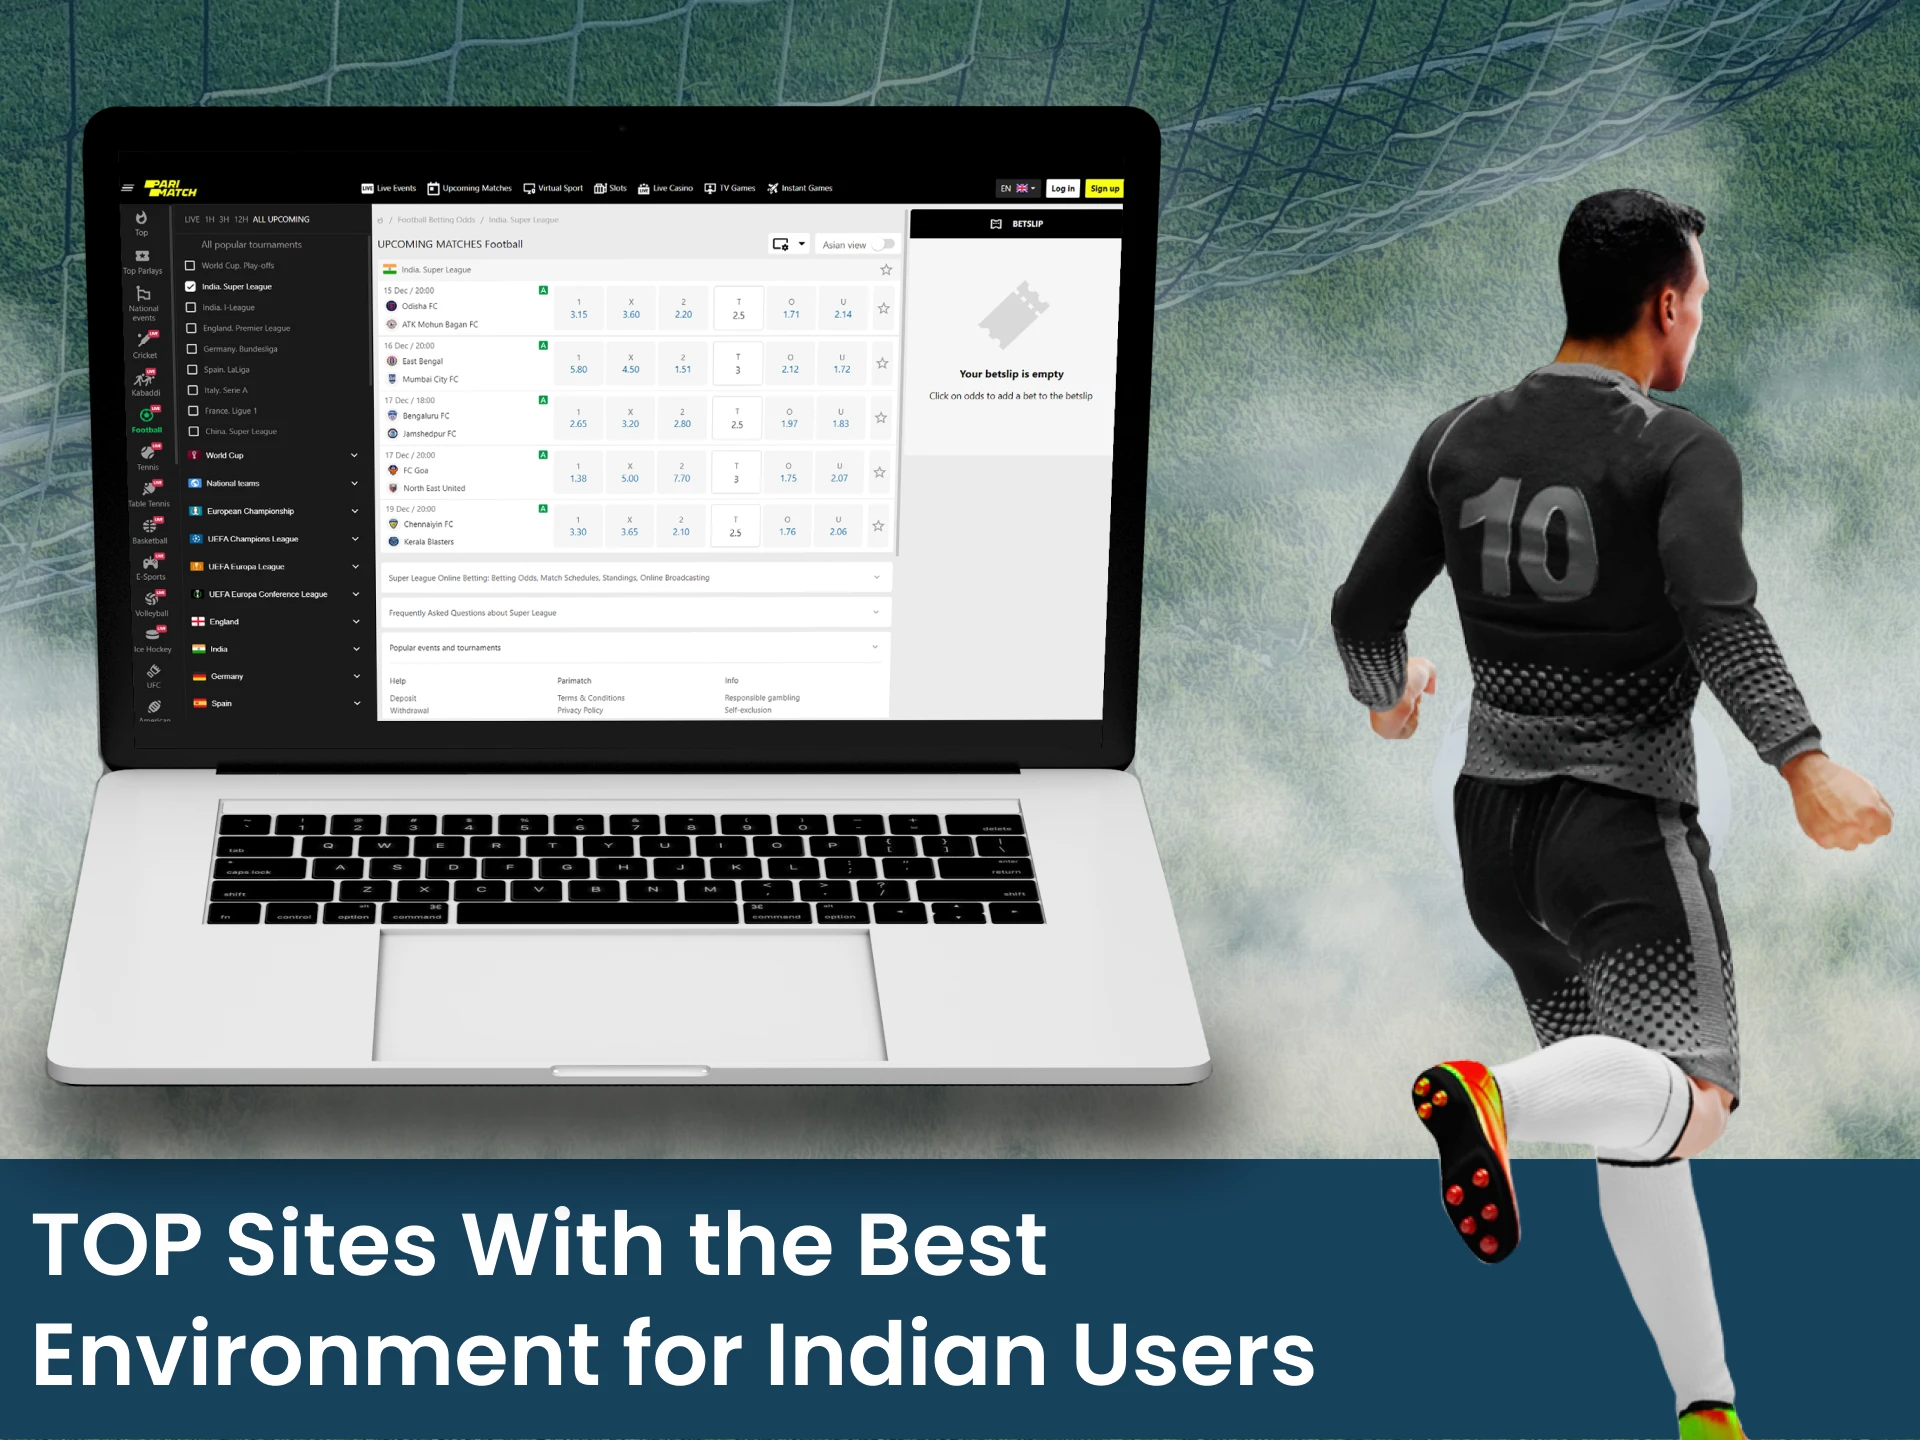 Most Indian users will like football betting on these websites.